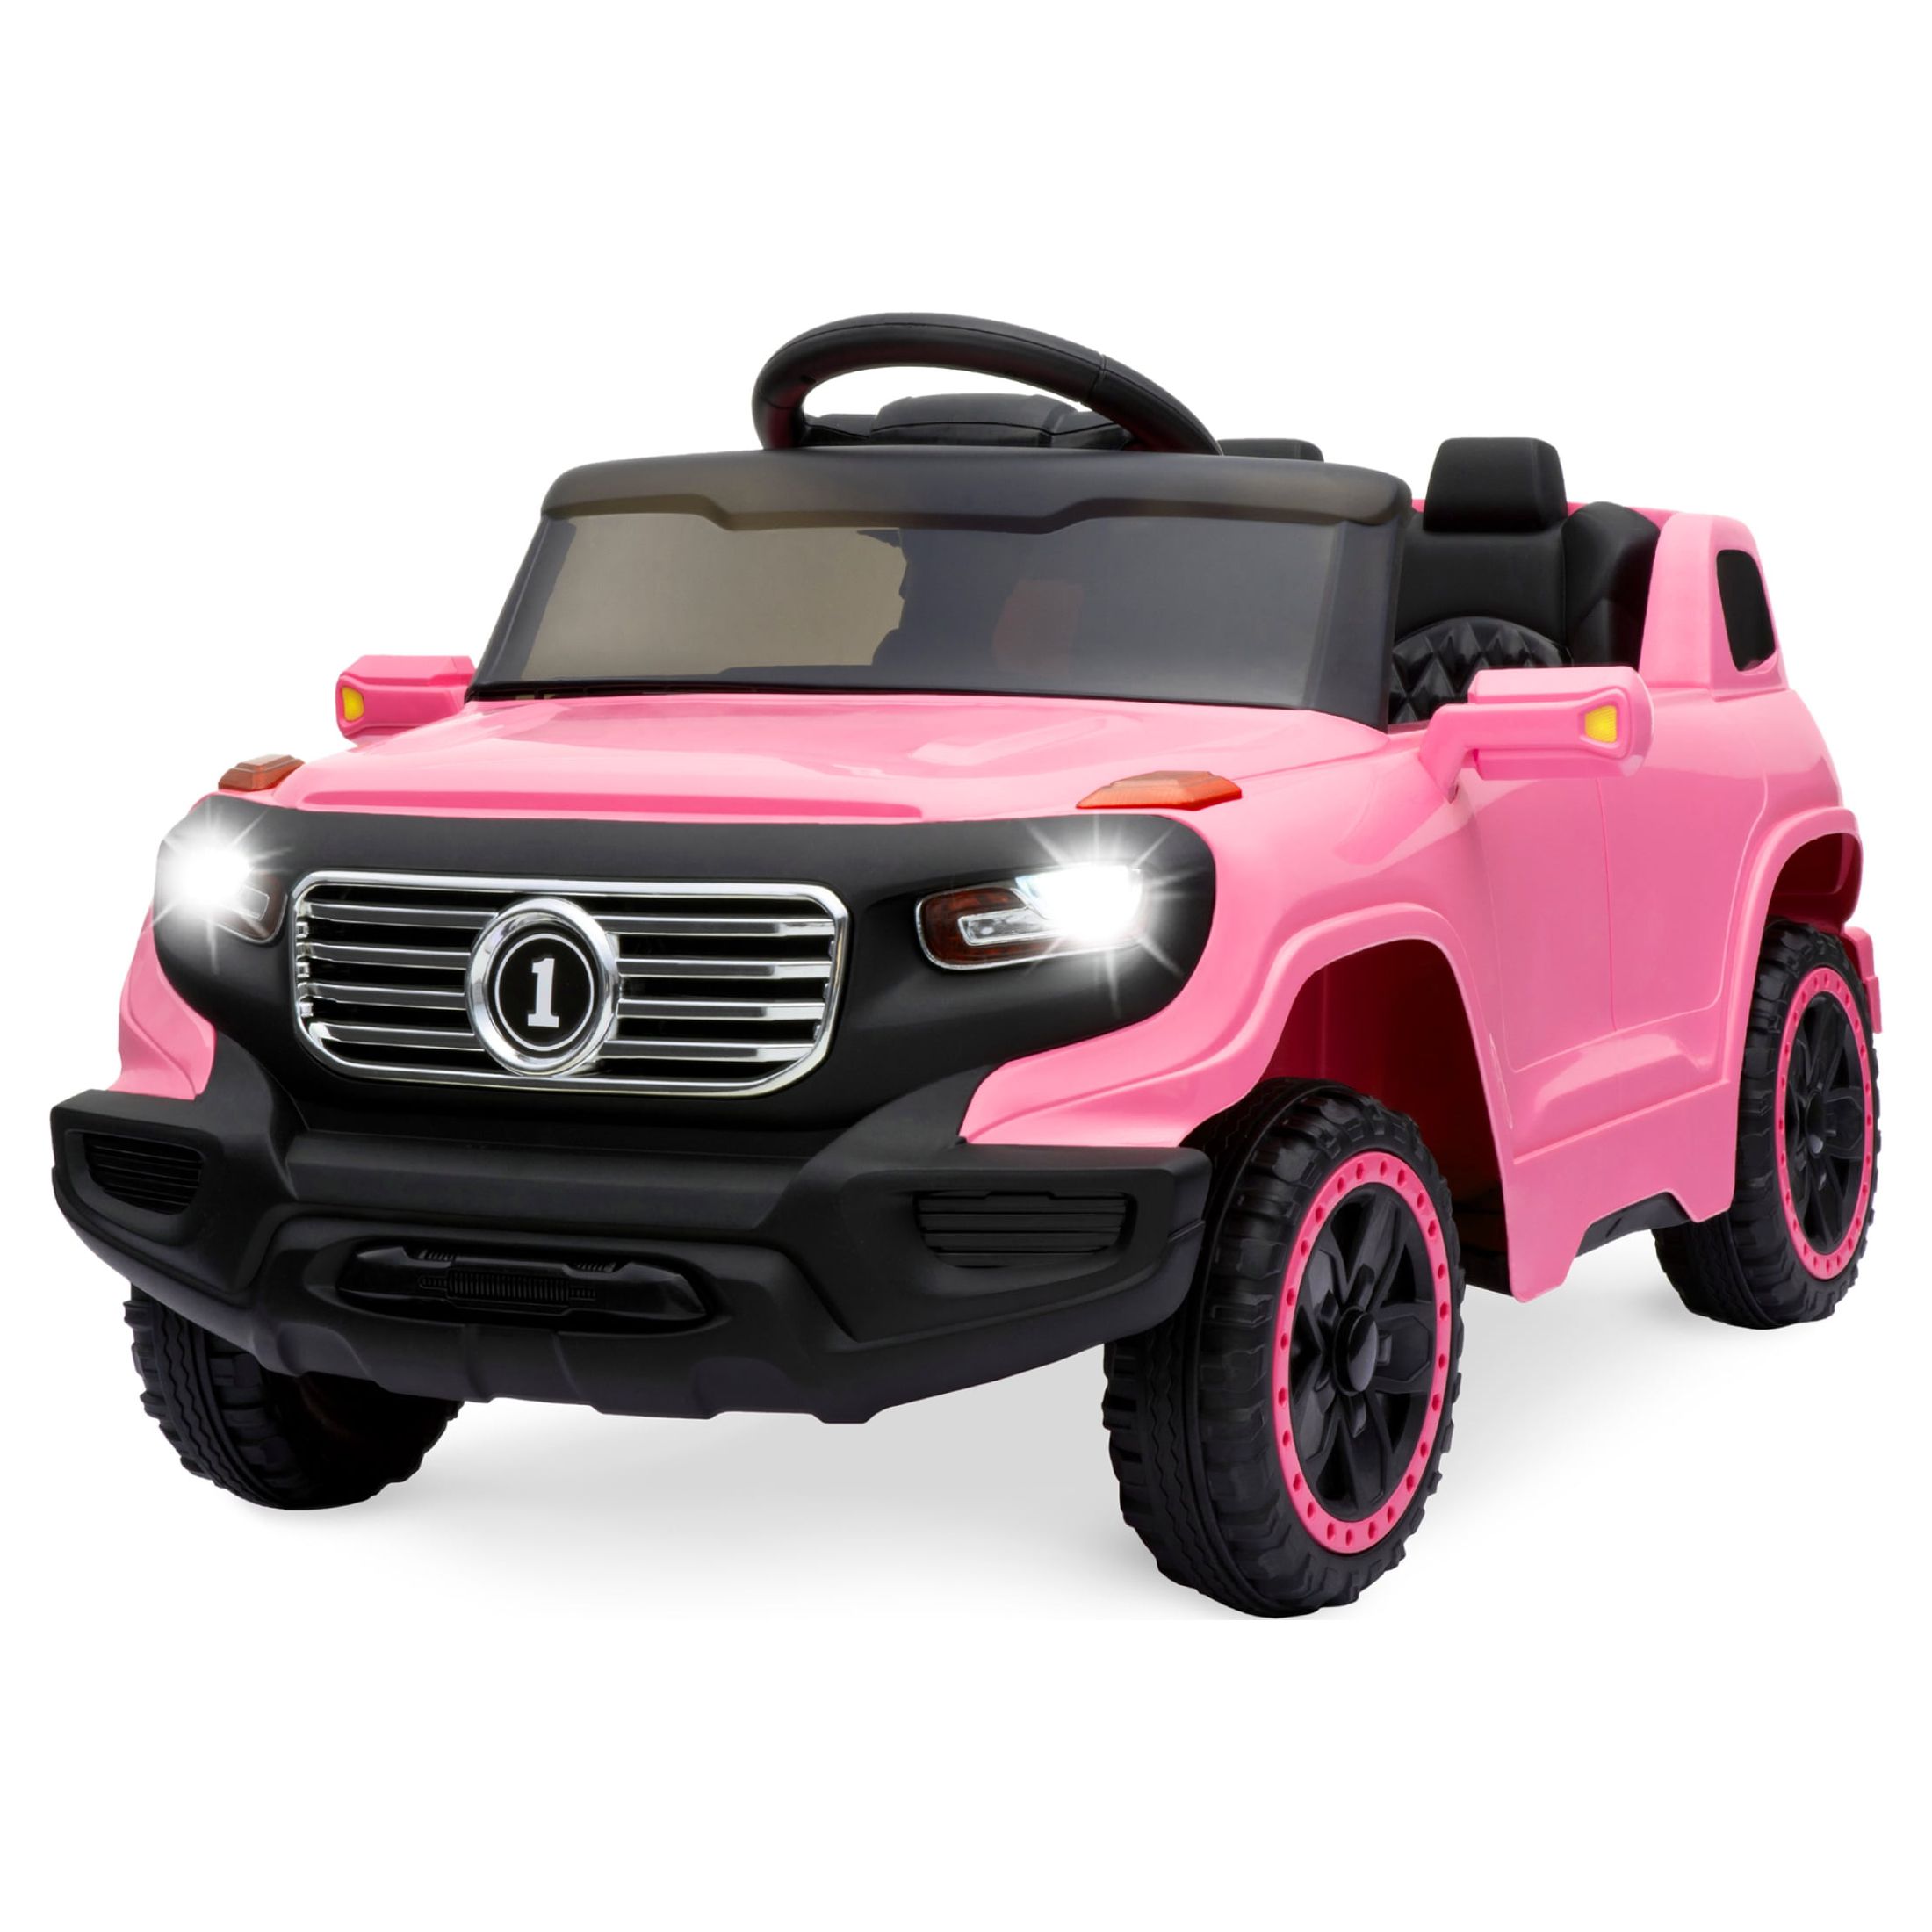 Best Choice Products 6V Kids Ride On Car Truck w/ Parent Control, 3 Speeds, LED Headlights, MP3 Player, Horn - Pink - image 1 of 7